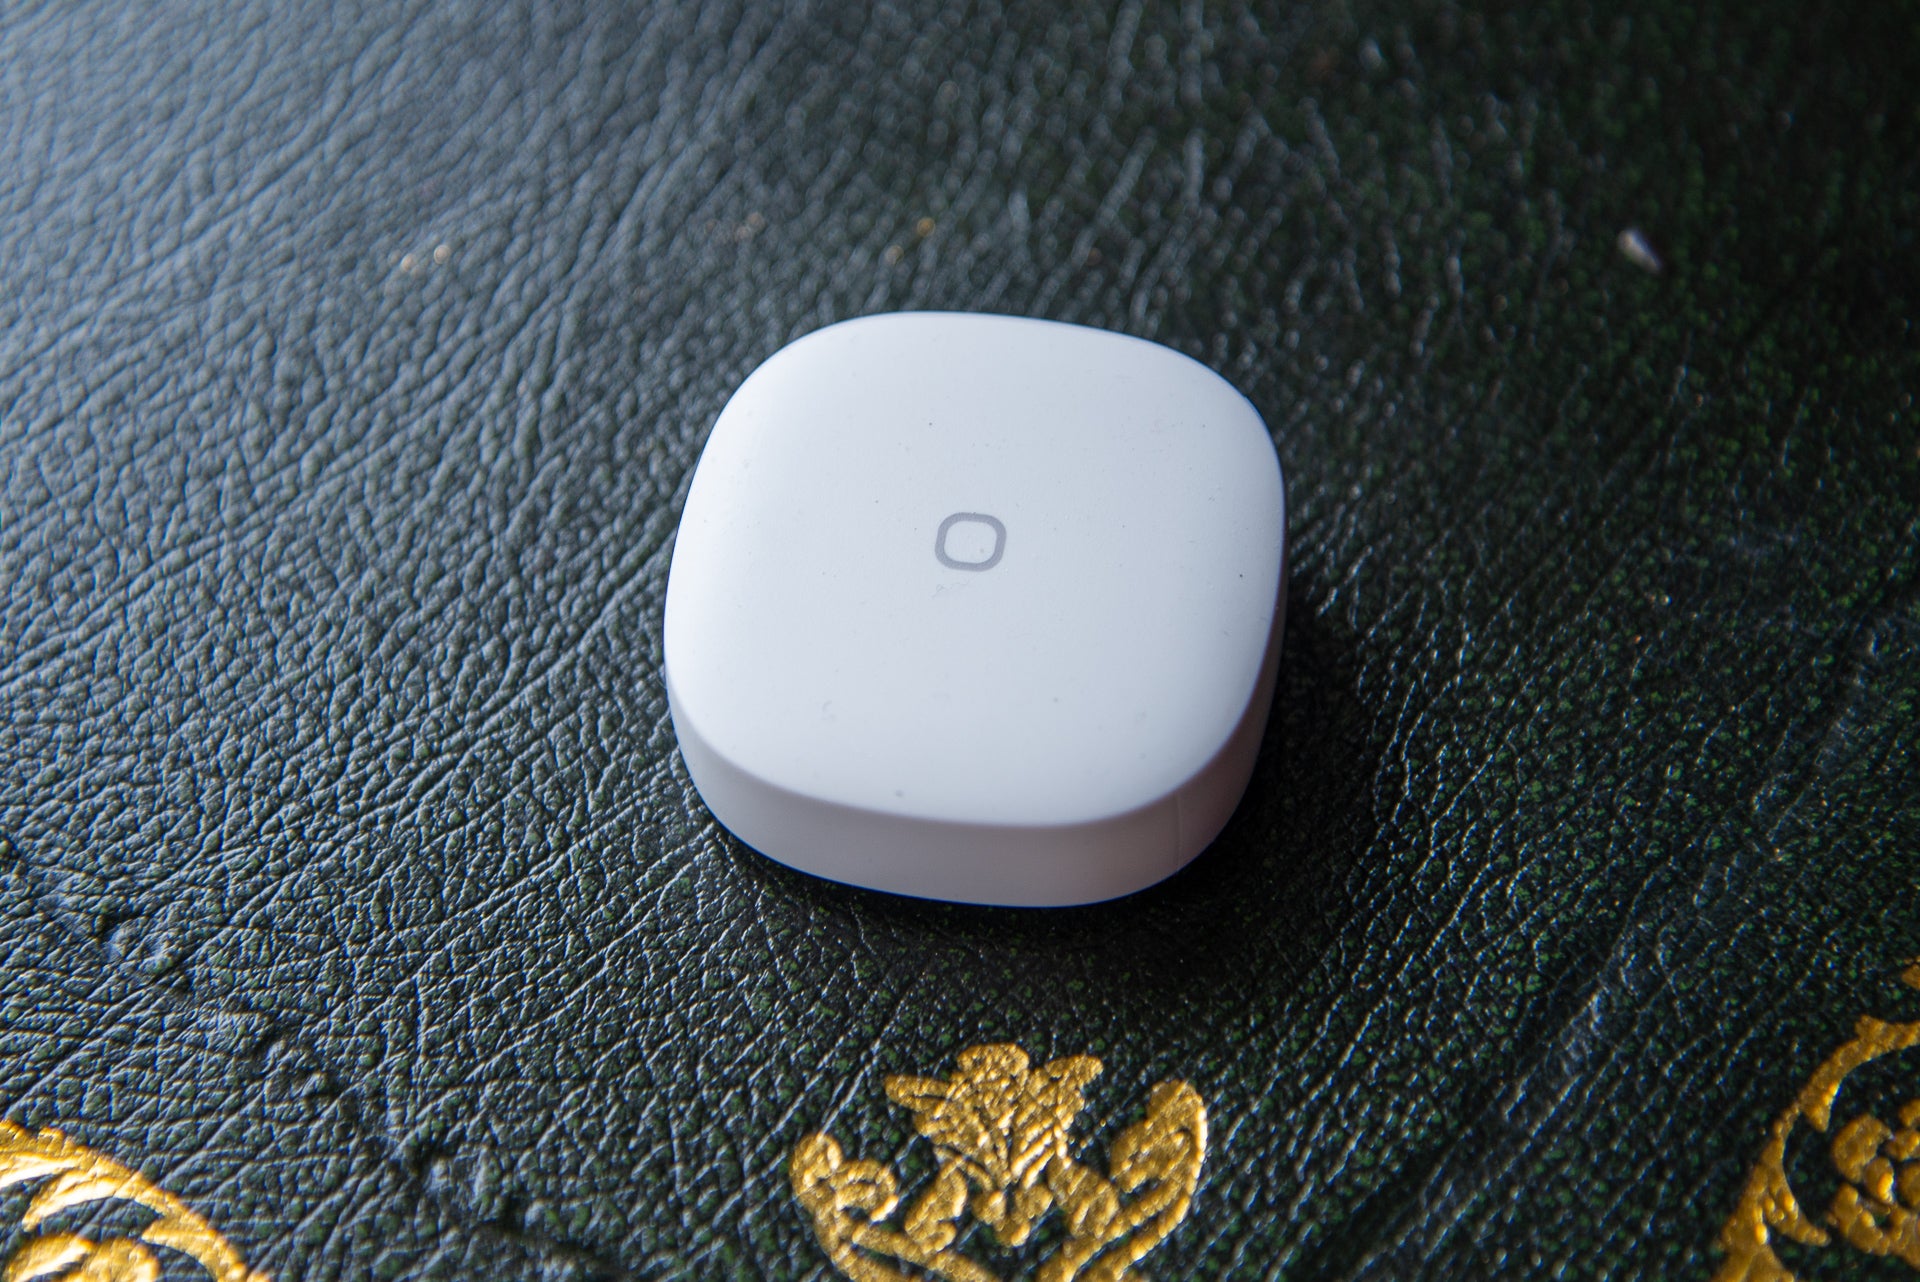 Samsung SmartThings button